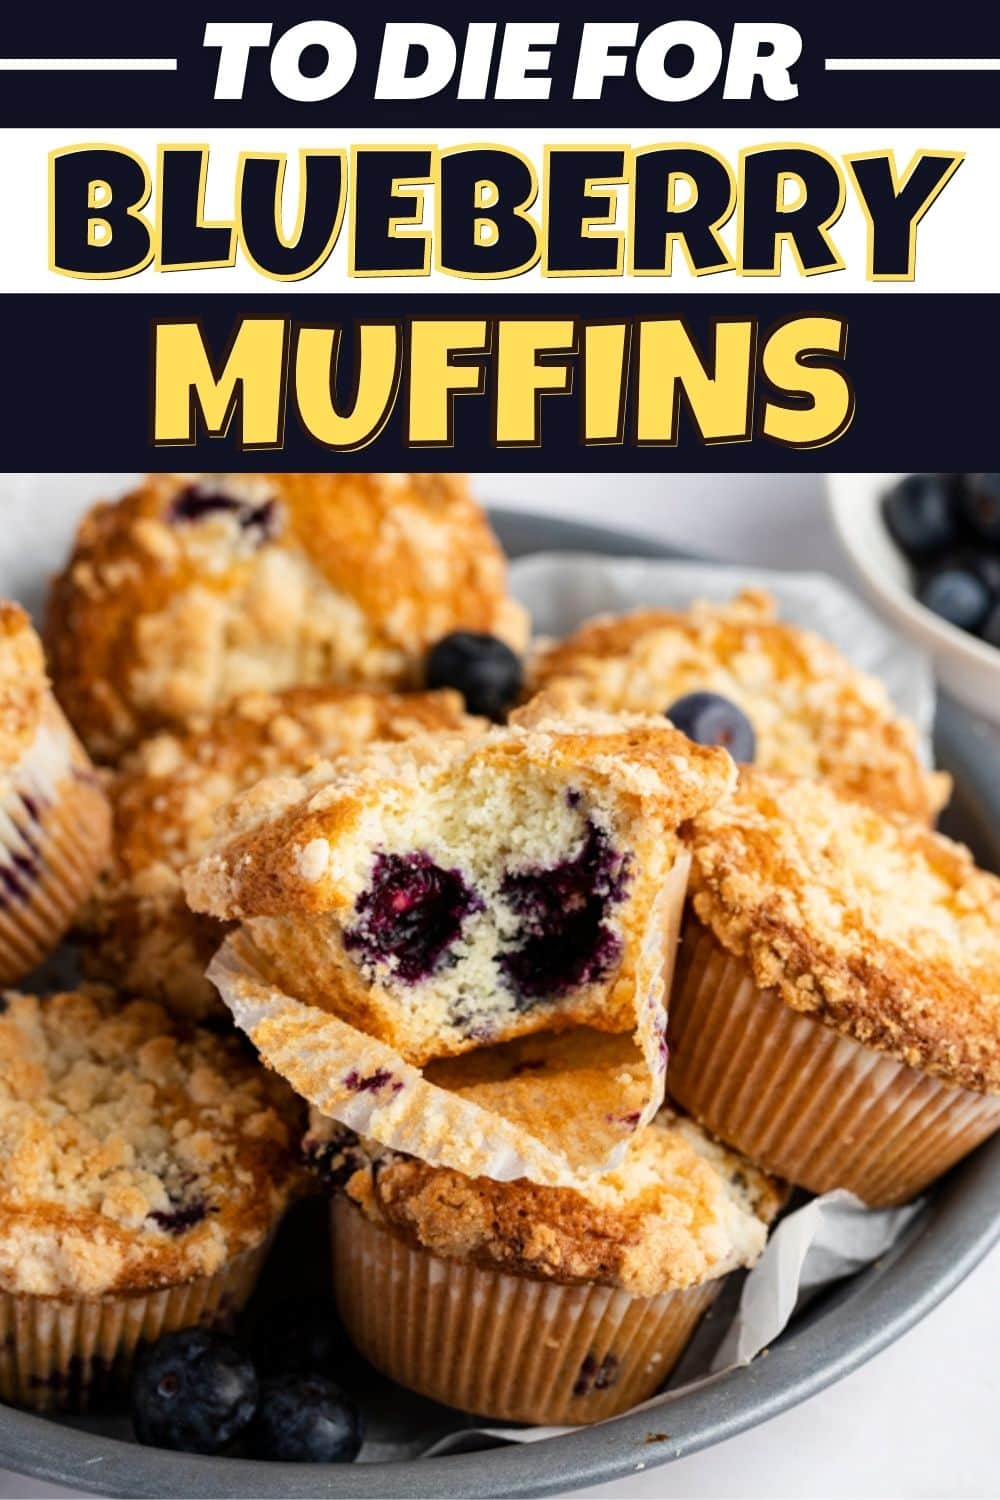 To Die For Blueberry Muffins - Insanely Good